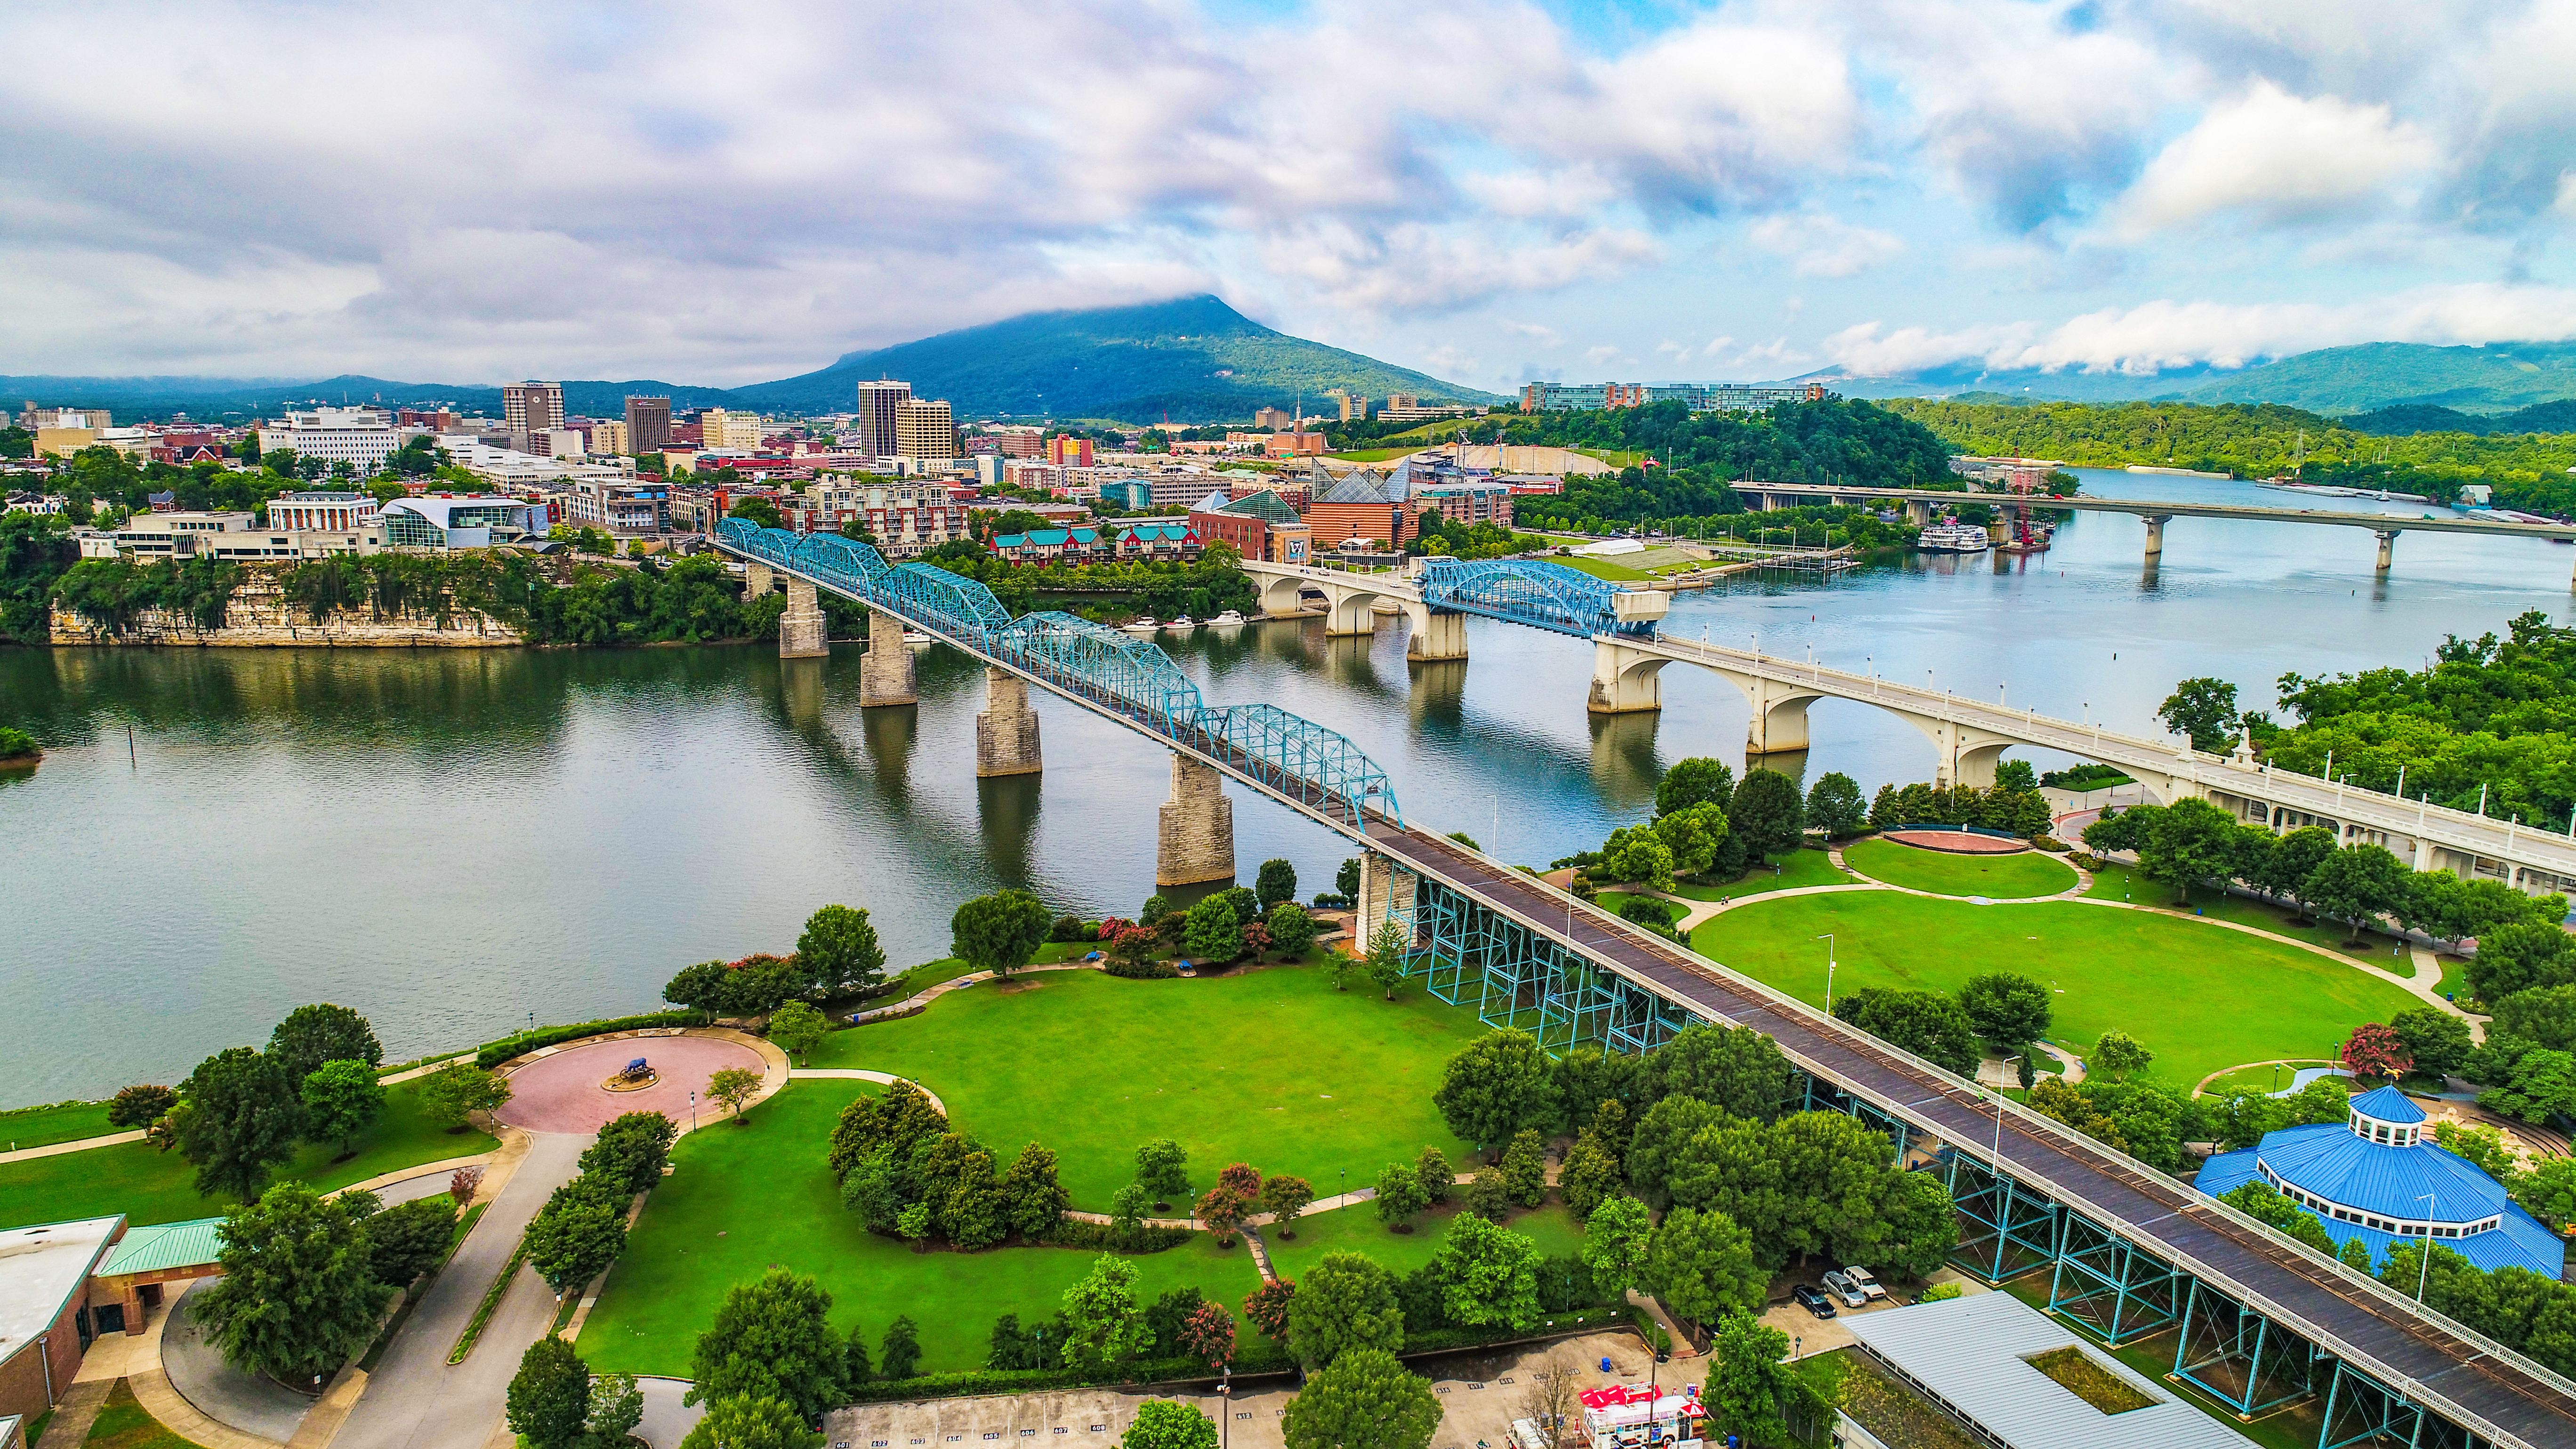 Aerial view of Downtown, Chattanooga | Source: Shutterstock